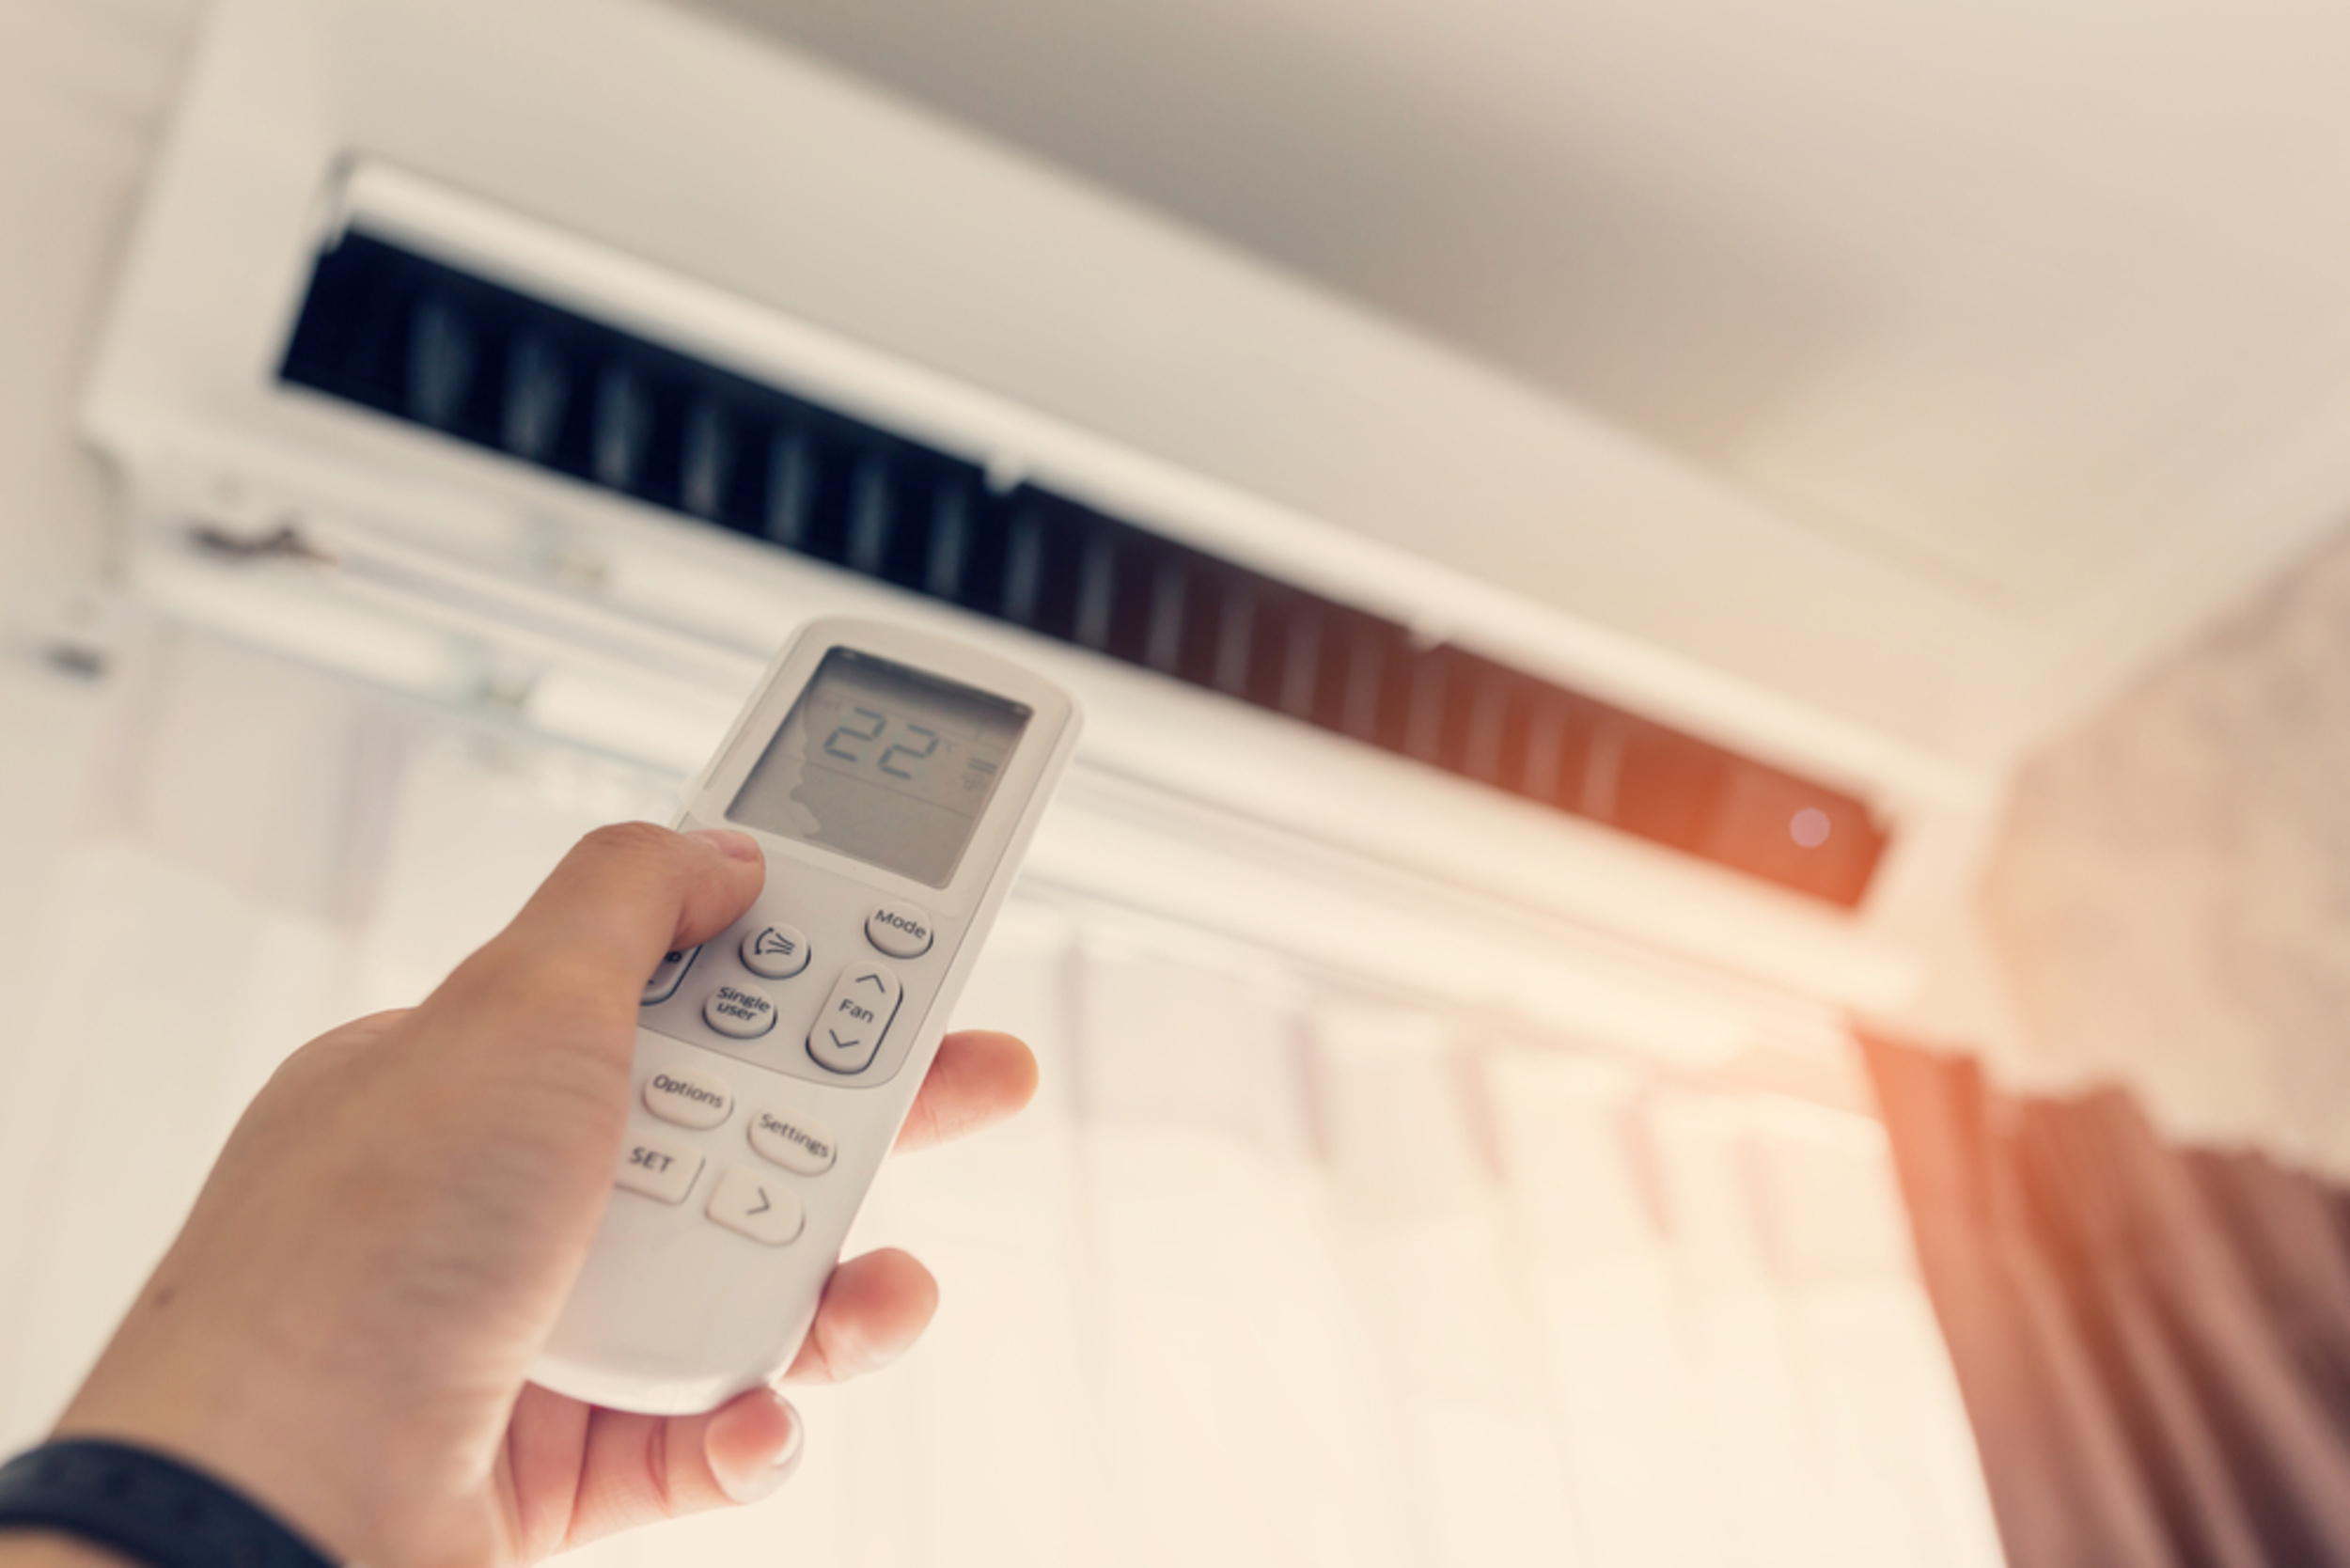 <p>Although it seems like a smart way to conserve energy, turning off the air conditioning while you're out isn't actually the best idea. You'll spend more energy trying to cool the house back down from those higher temps, and risk putting strain on your A/C unit. </p><p>You may also like: <a href='https://www.yardbarker.com/lifestyle/articles/11_most_scenic_pacific_northwest_road_trips/s1__38393677'>11 most scenic Pacific Northwest road trips</a></p>